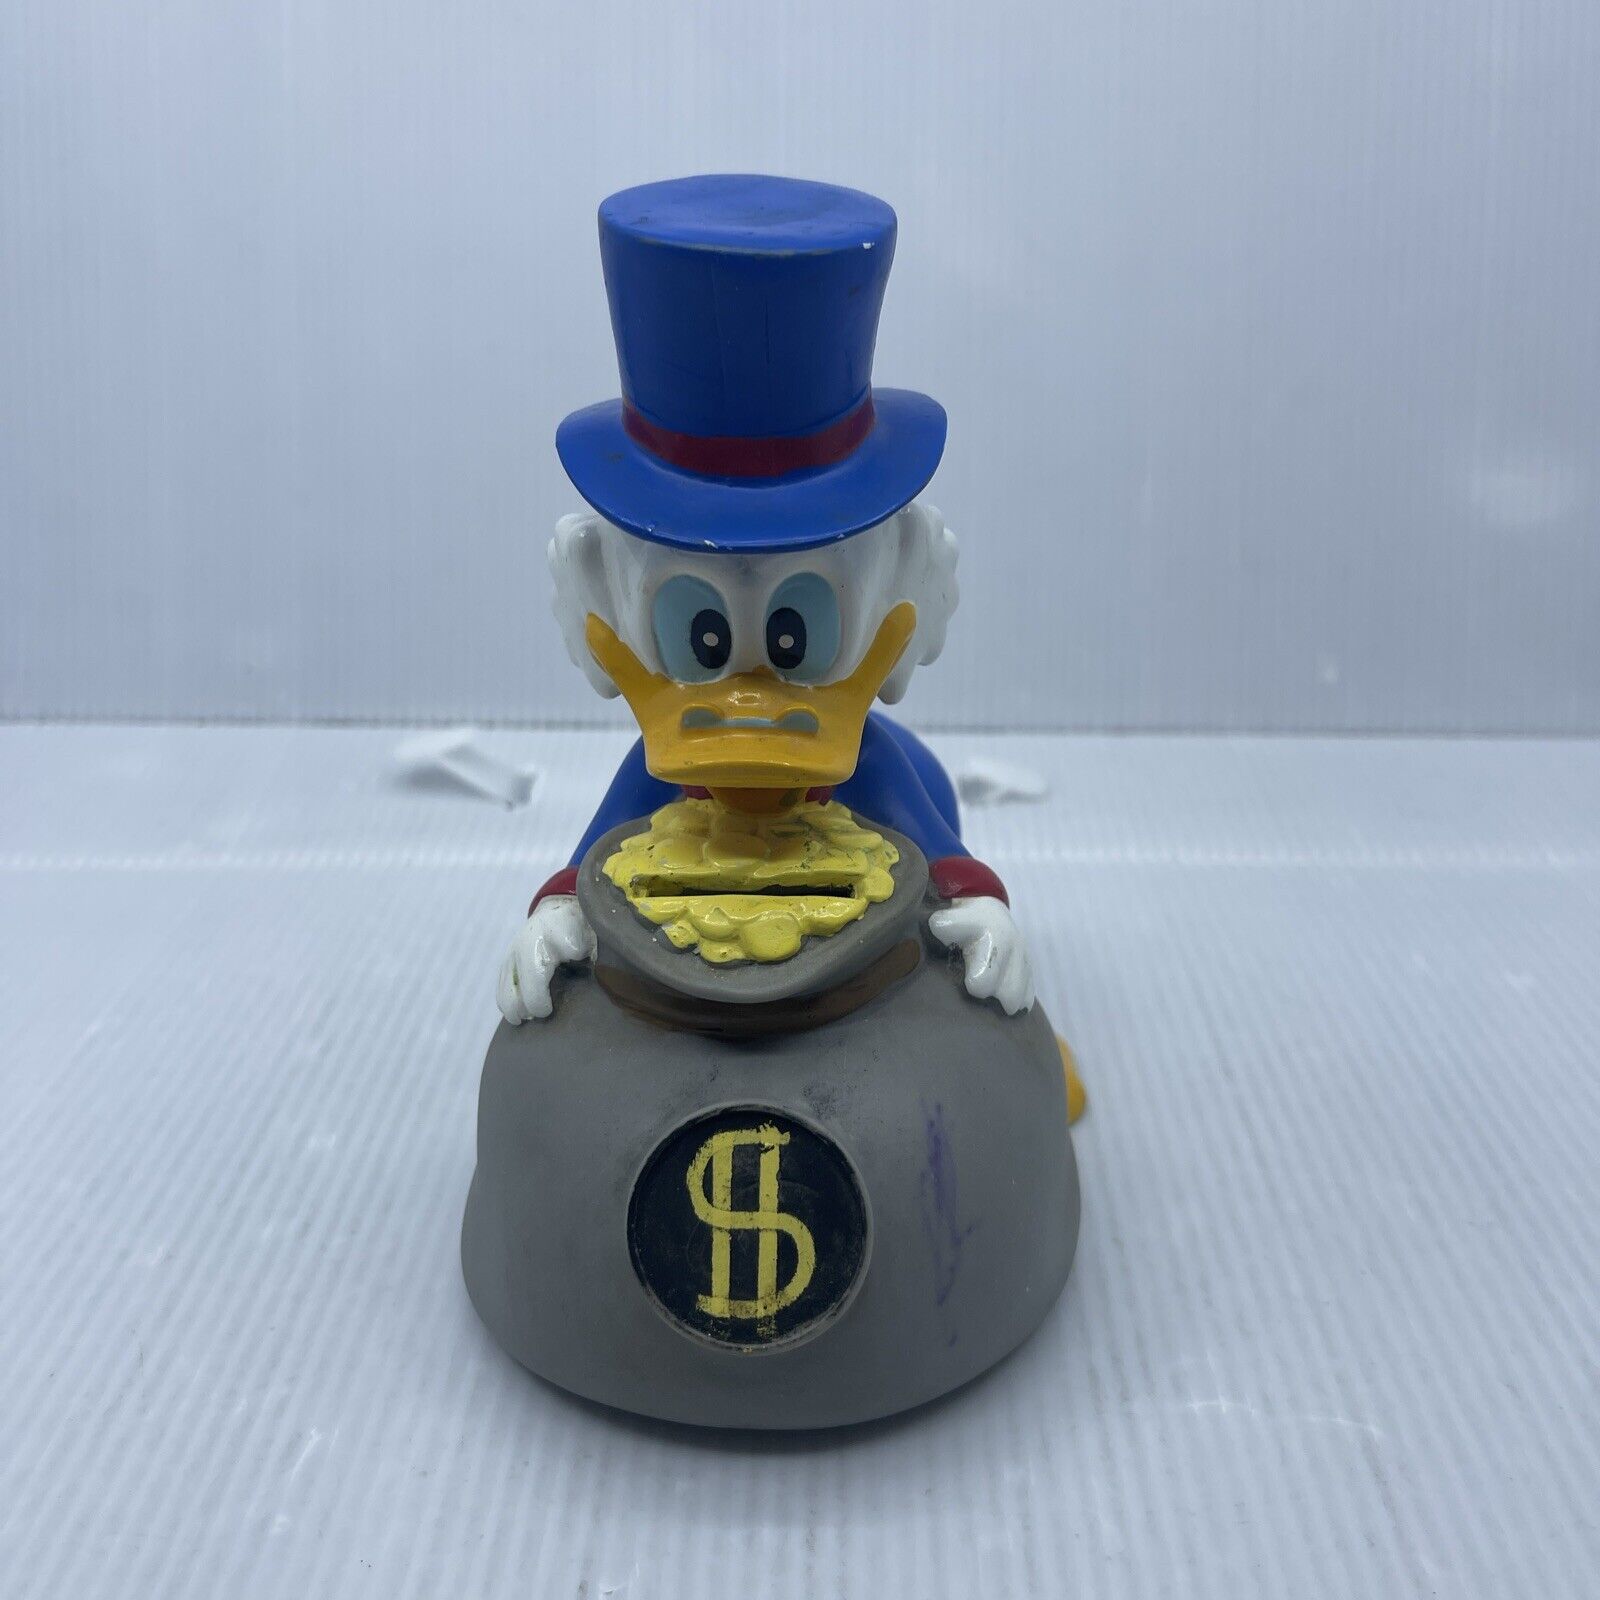 “Extremely Rare Walt Disney Scrooge McDuck Full Money Old Piggy Bank Fig Statue